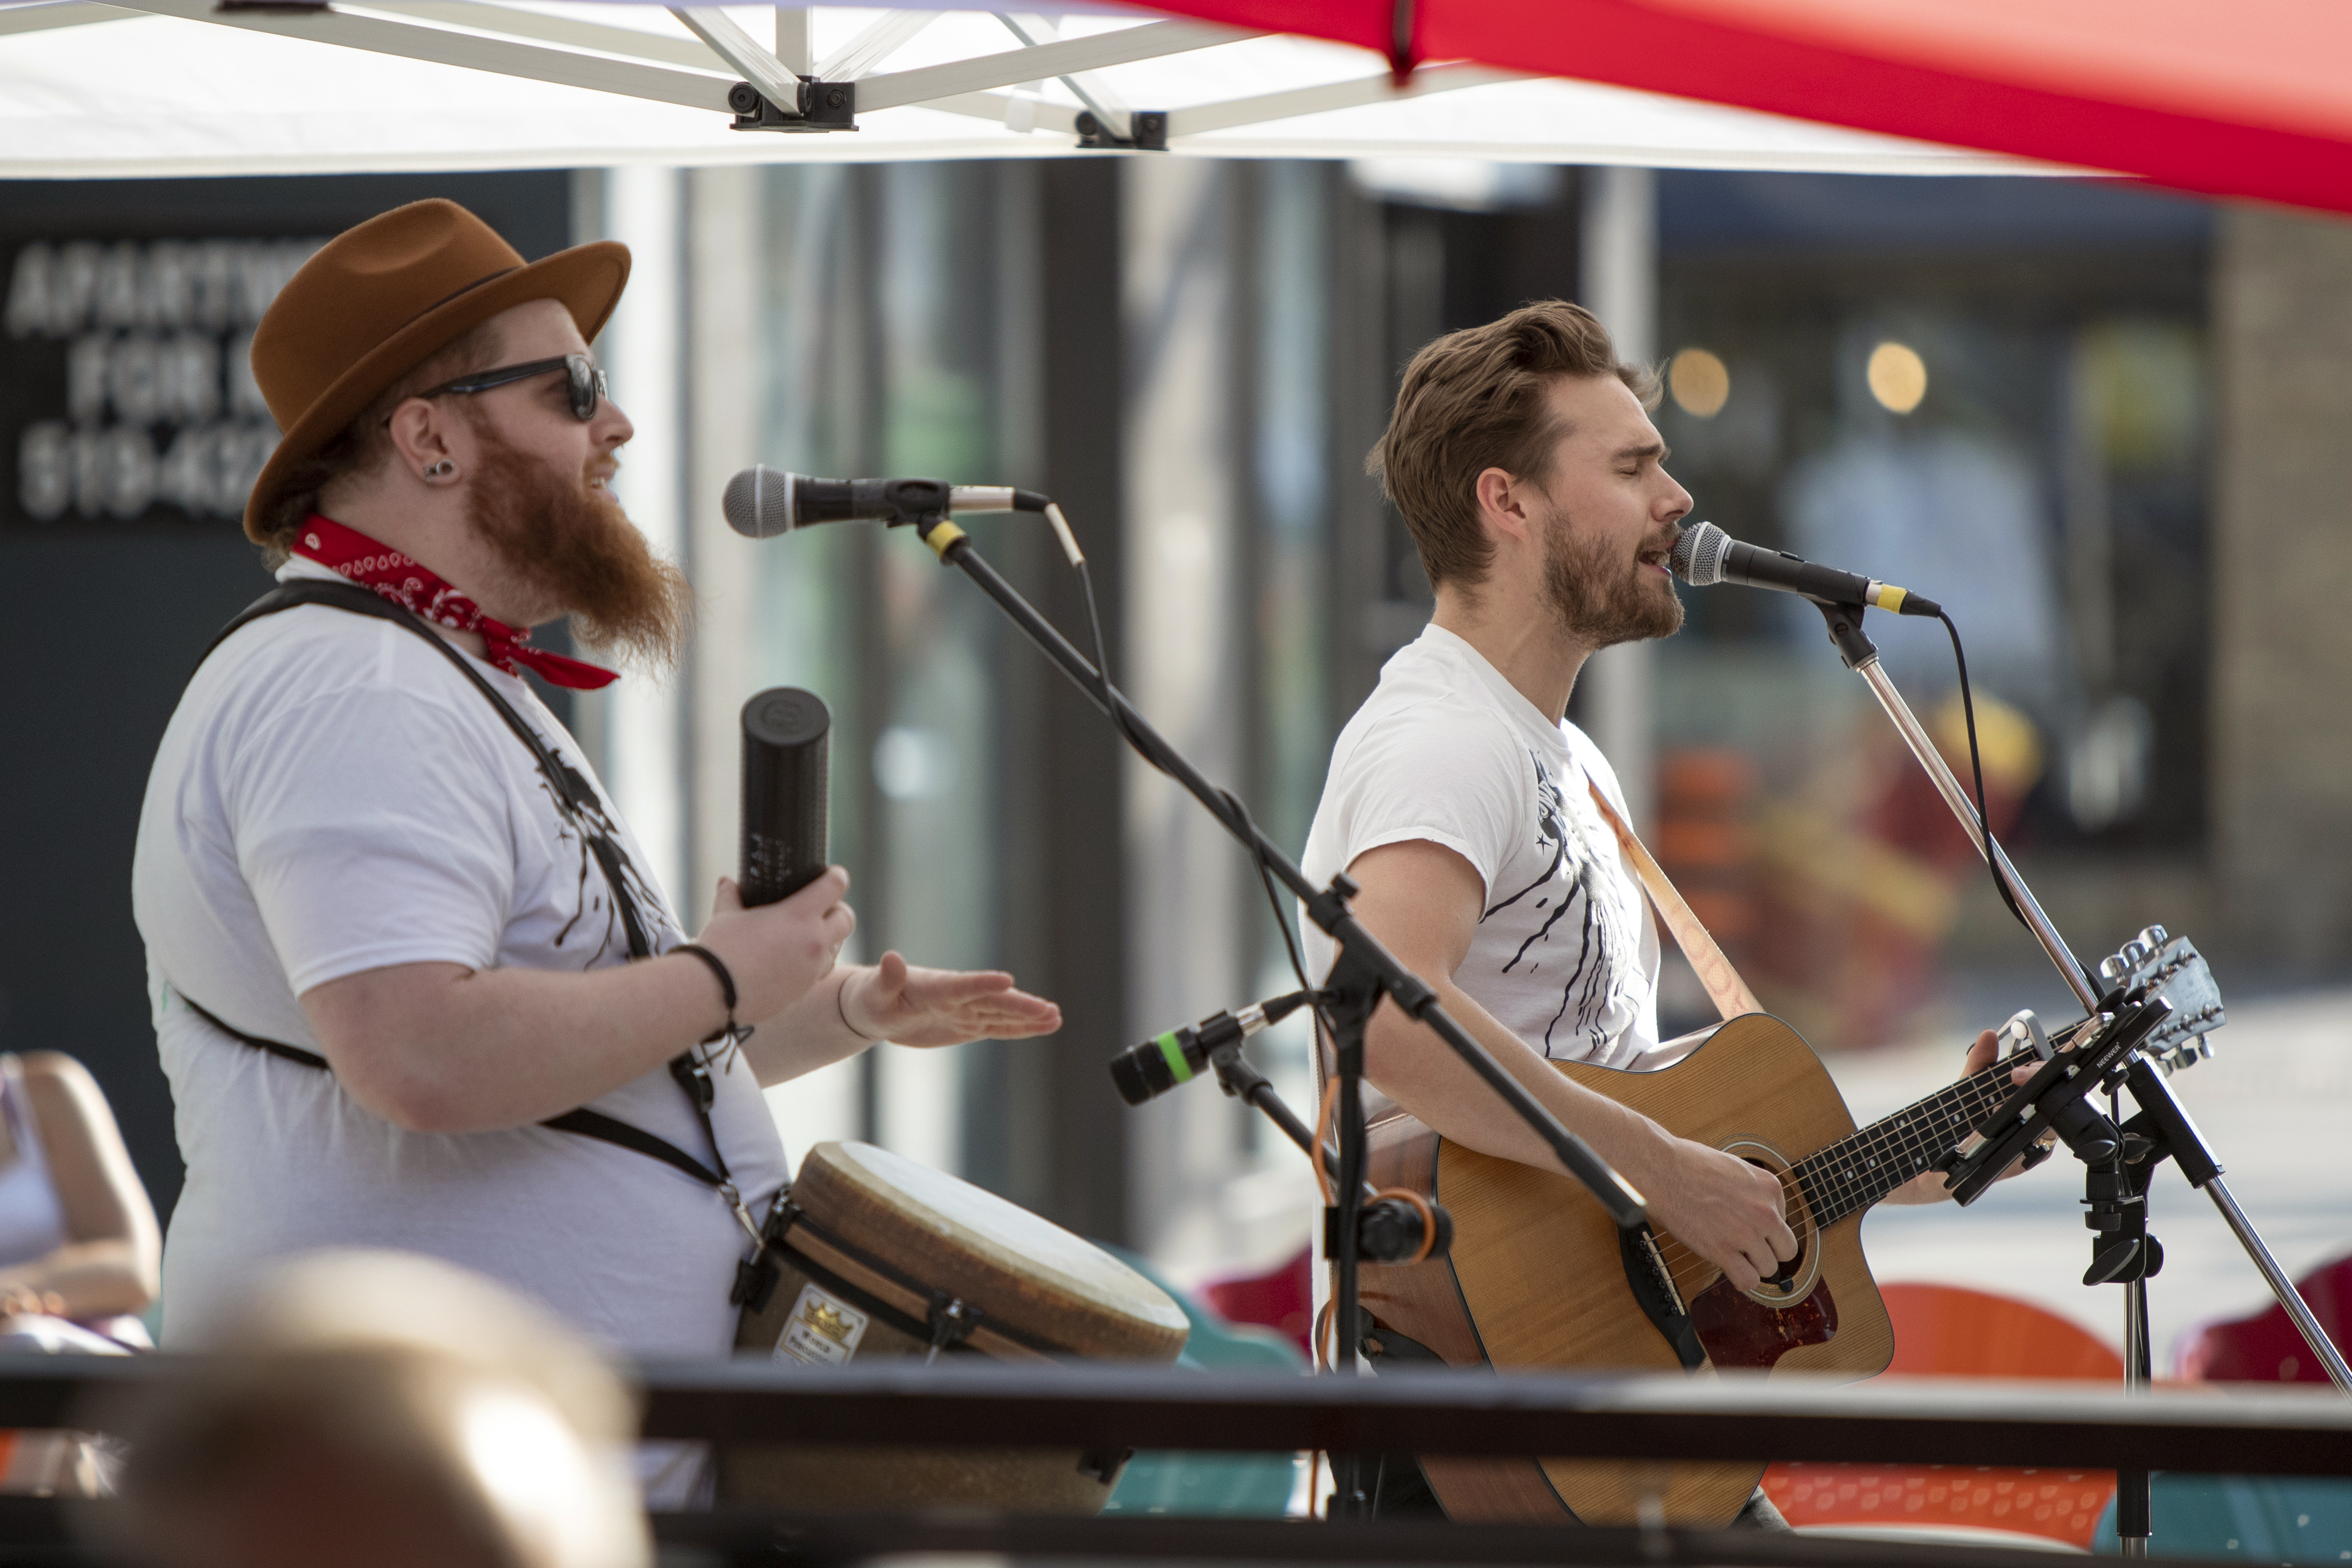 Musicians performing on Dundas Place’s sidewalk earlier this July. As businesses are reopening, additional programming is being planned for both weekdays and weekends each week. Some of this programming will now be extended into the street.